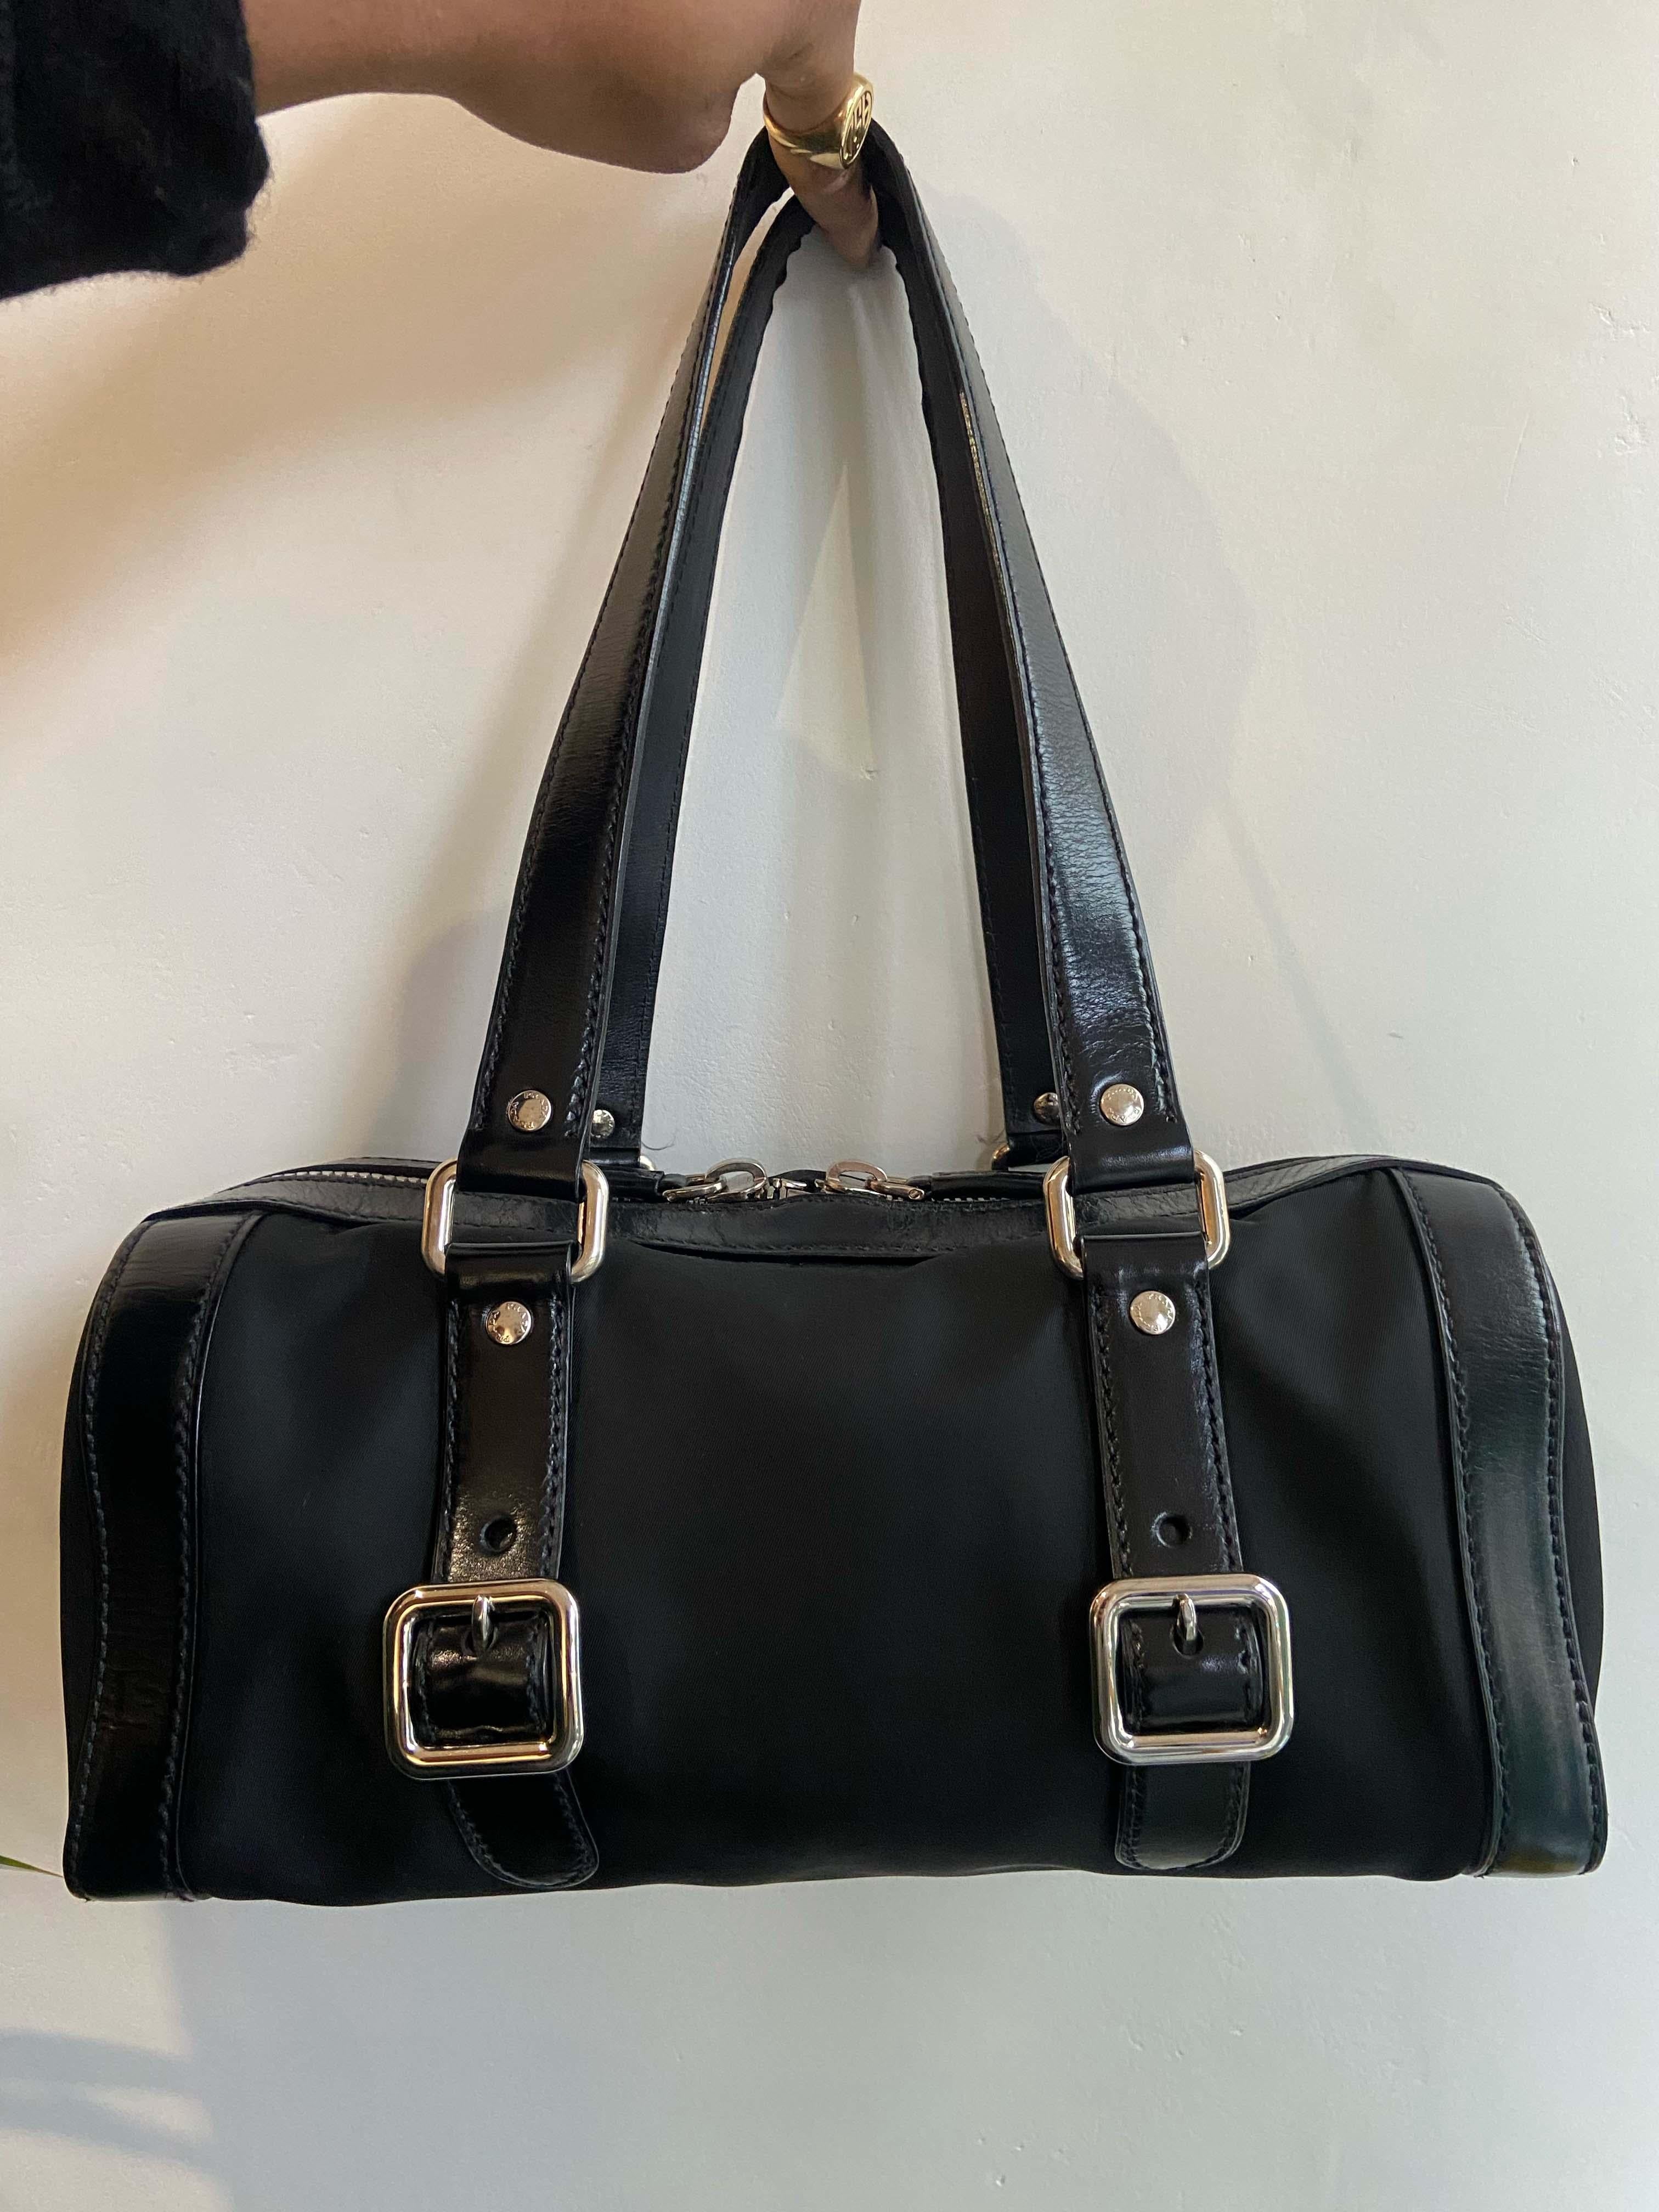 Vintage Prada  1990’s bowling bag. Features black nylon fabric  two back interior zip pockets. Leather strap,   and Prada front logo. Double zip closure.

Brand: Prada
Color: Black
Fabric: Nylon, Leather
Year / Season: Circa 2000's
Authenticity